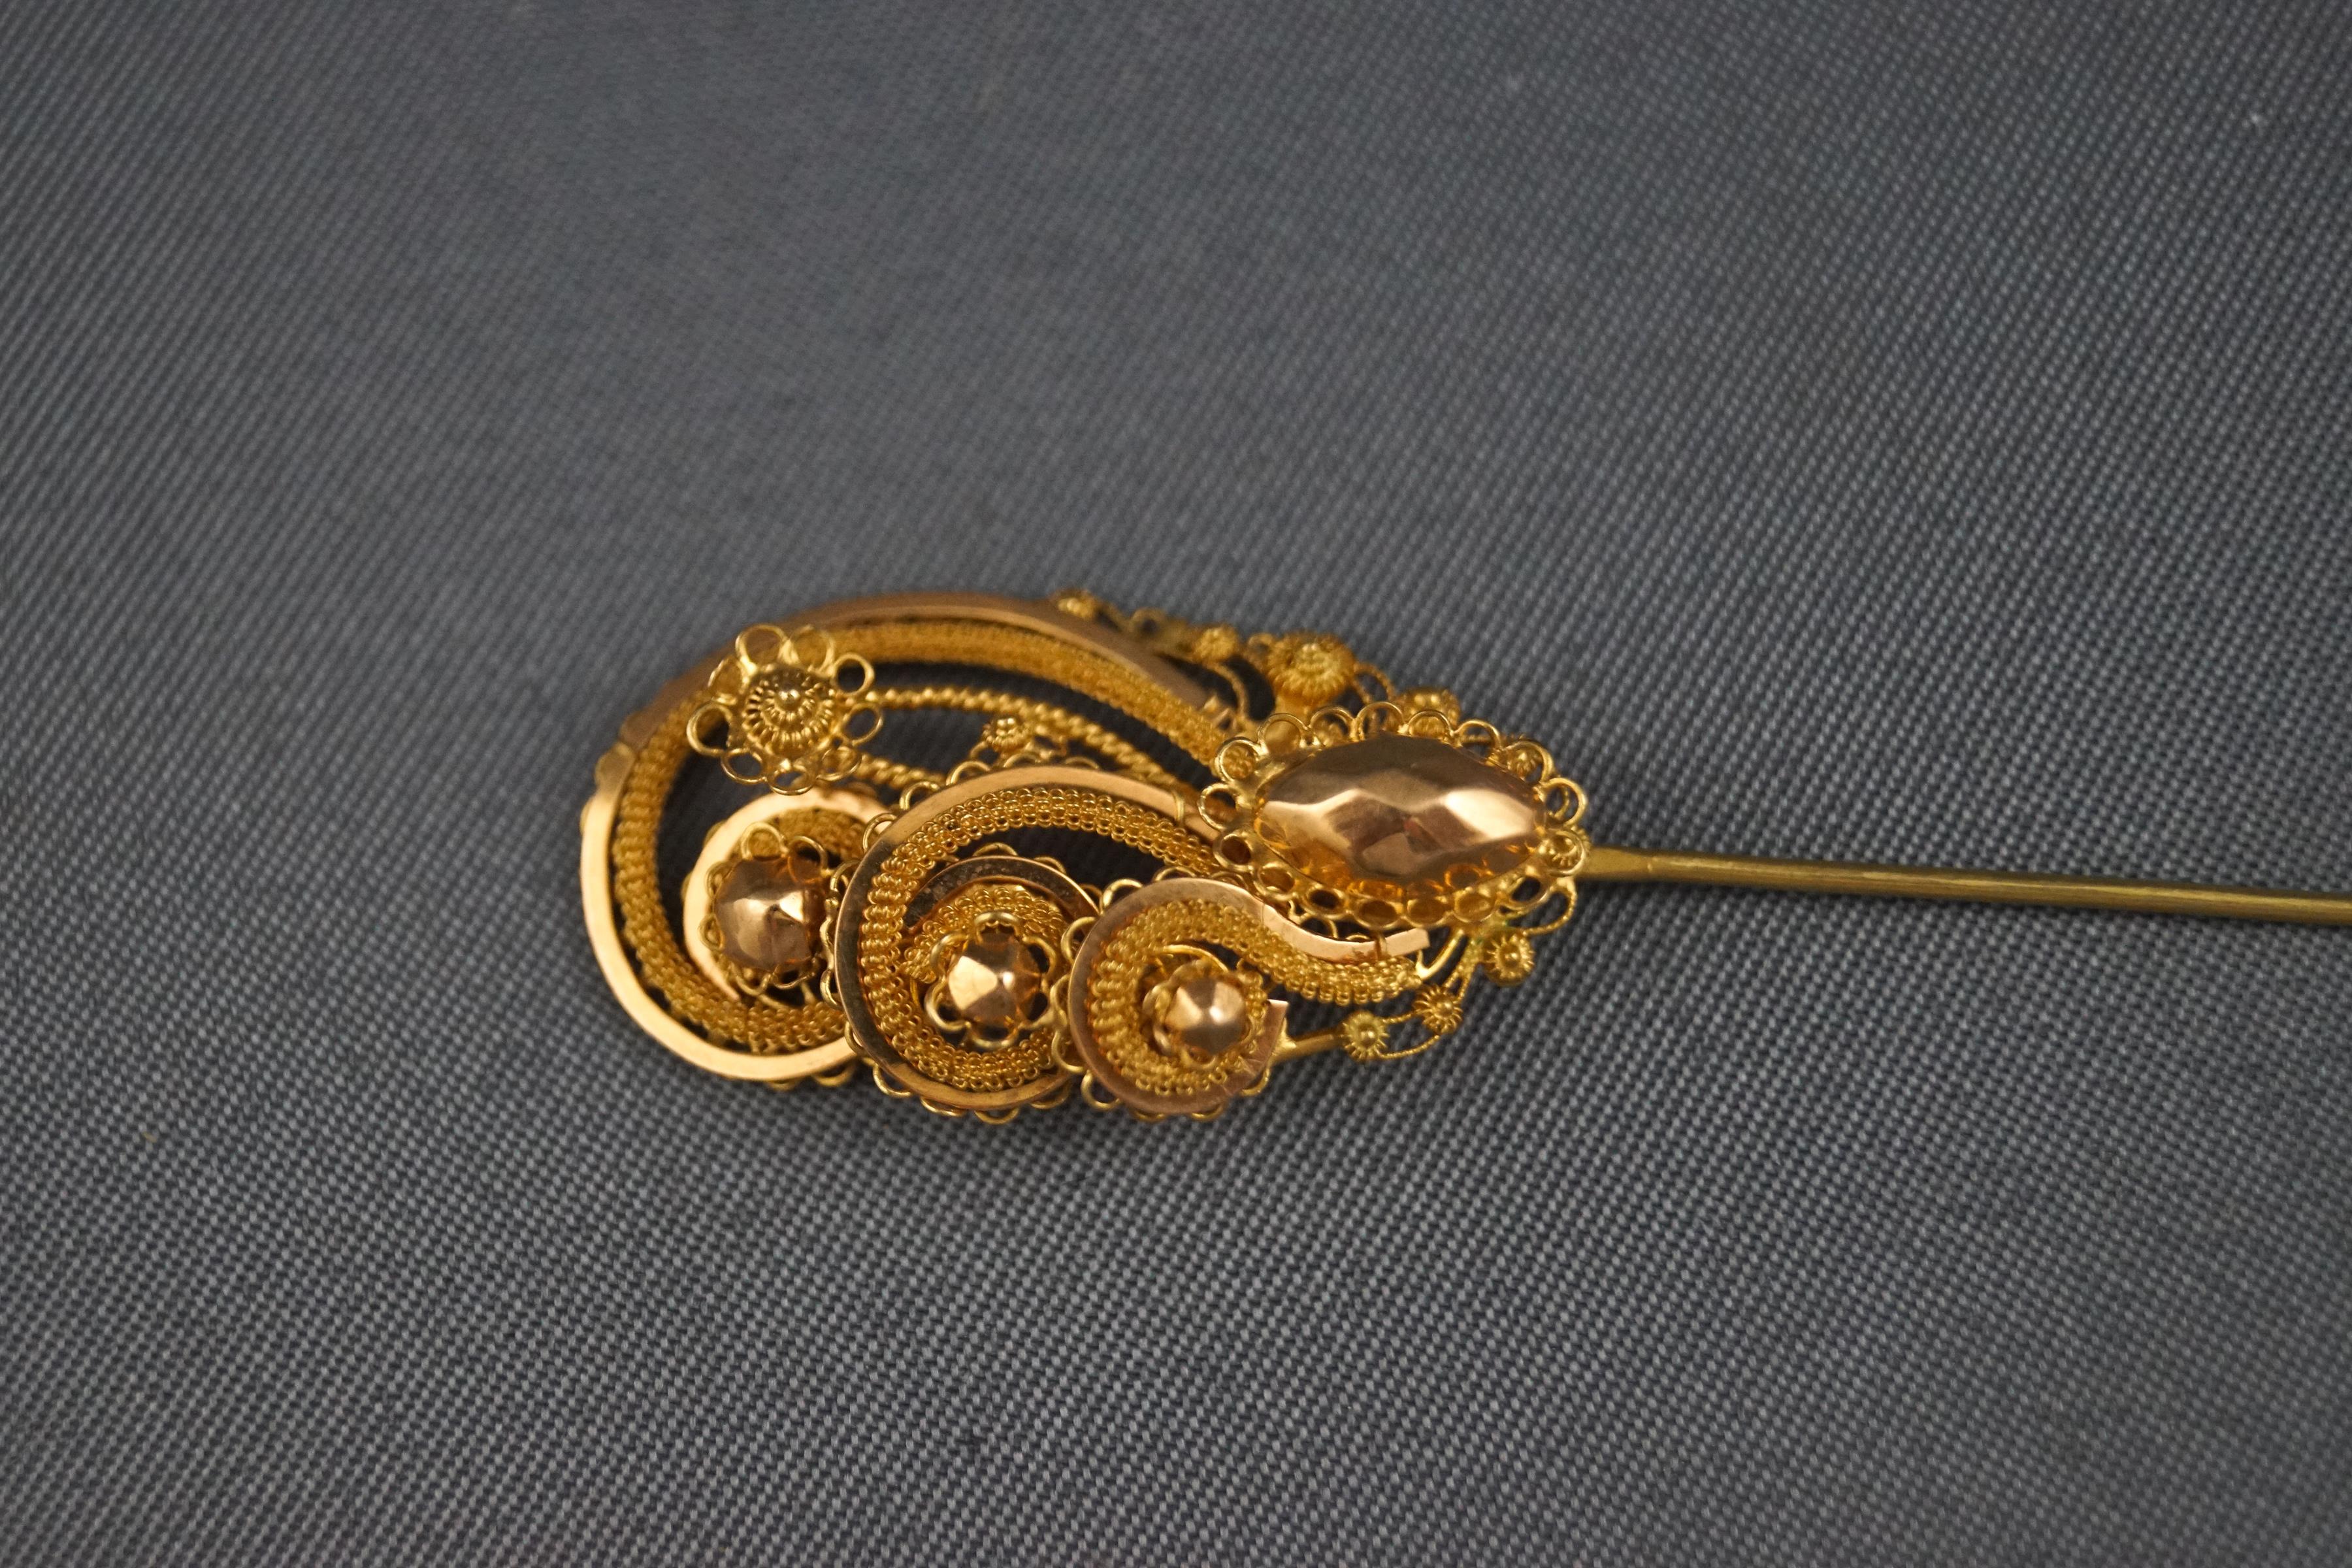 A yellow metal hat pin with filigree and beaded design. Tested as 22ct gold. 2.